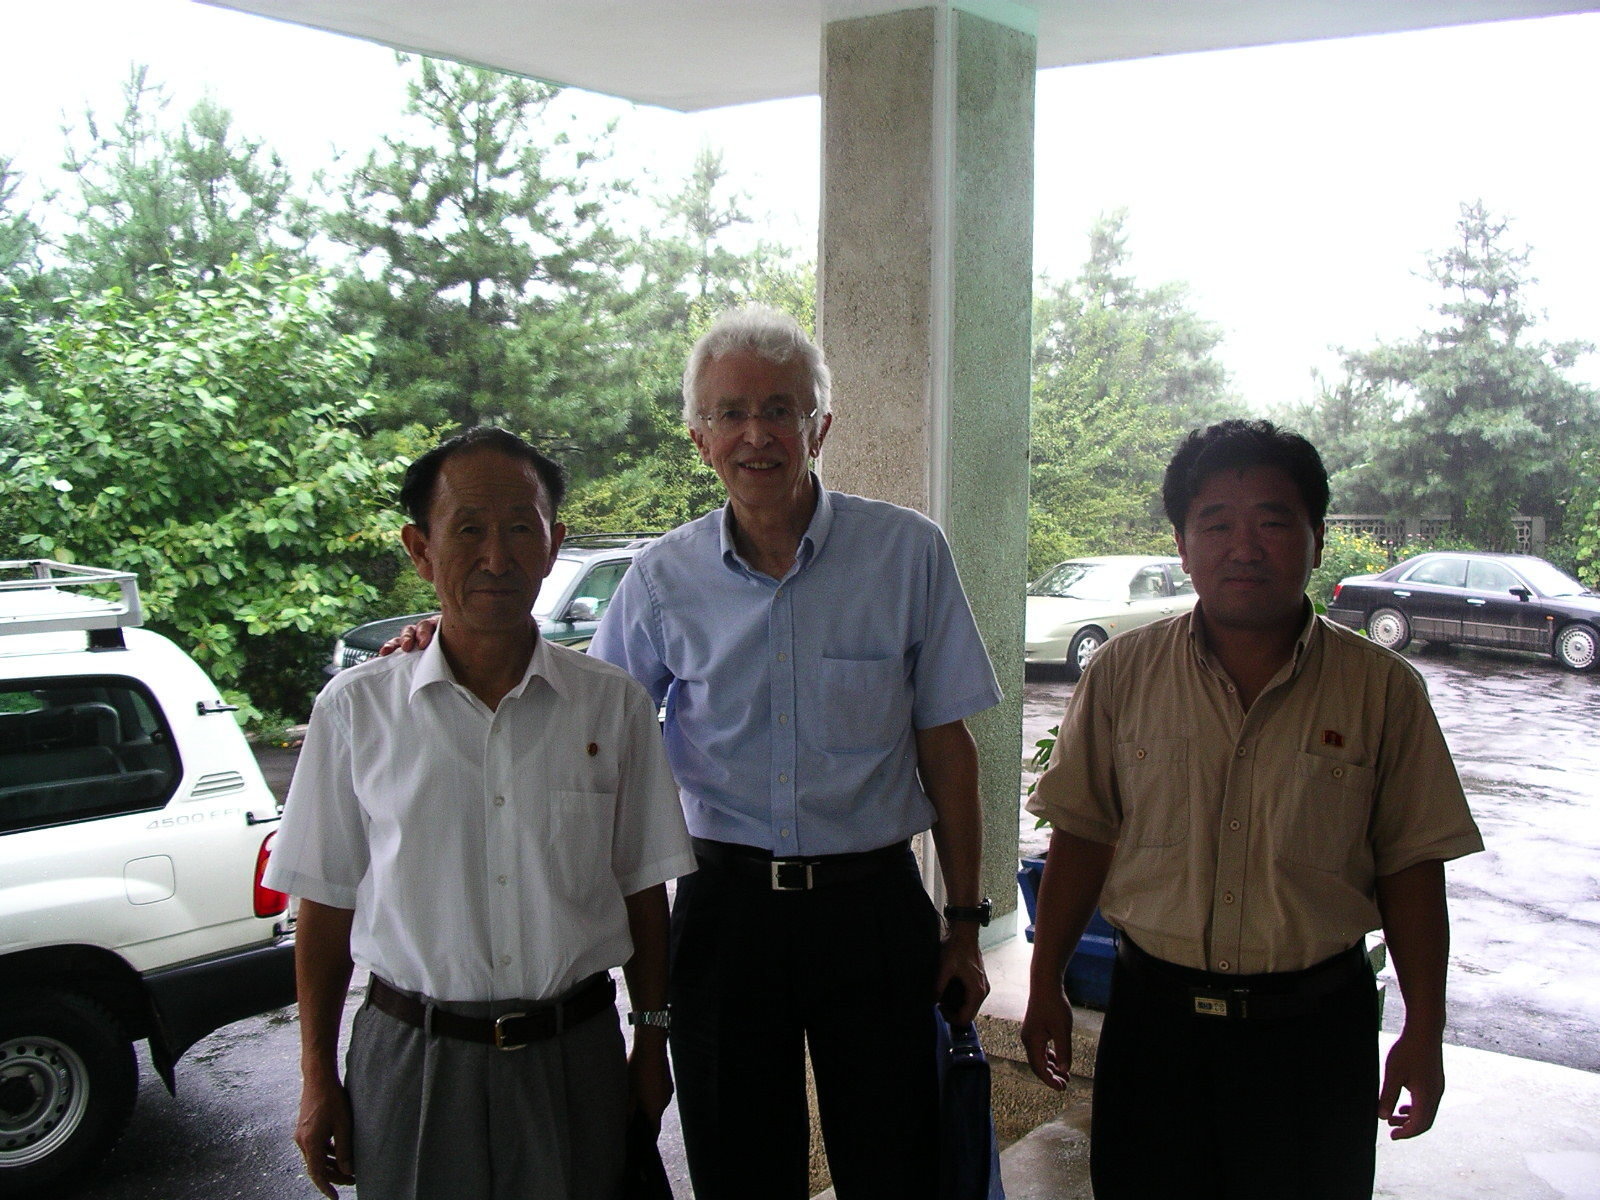 Hecker poses for photo with his hand on a shoulder of a North Korean man on his right and another North Korean man standing left.